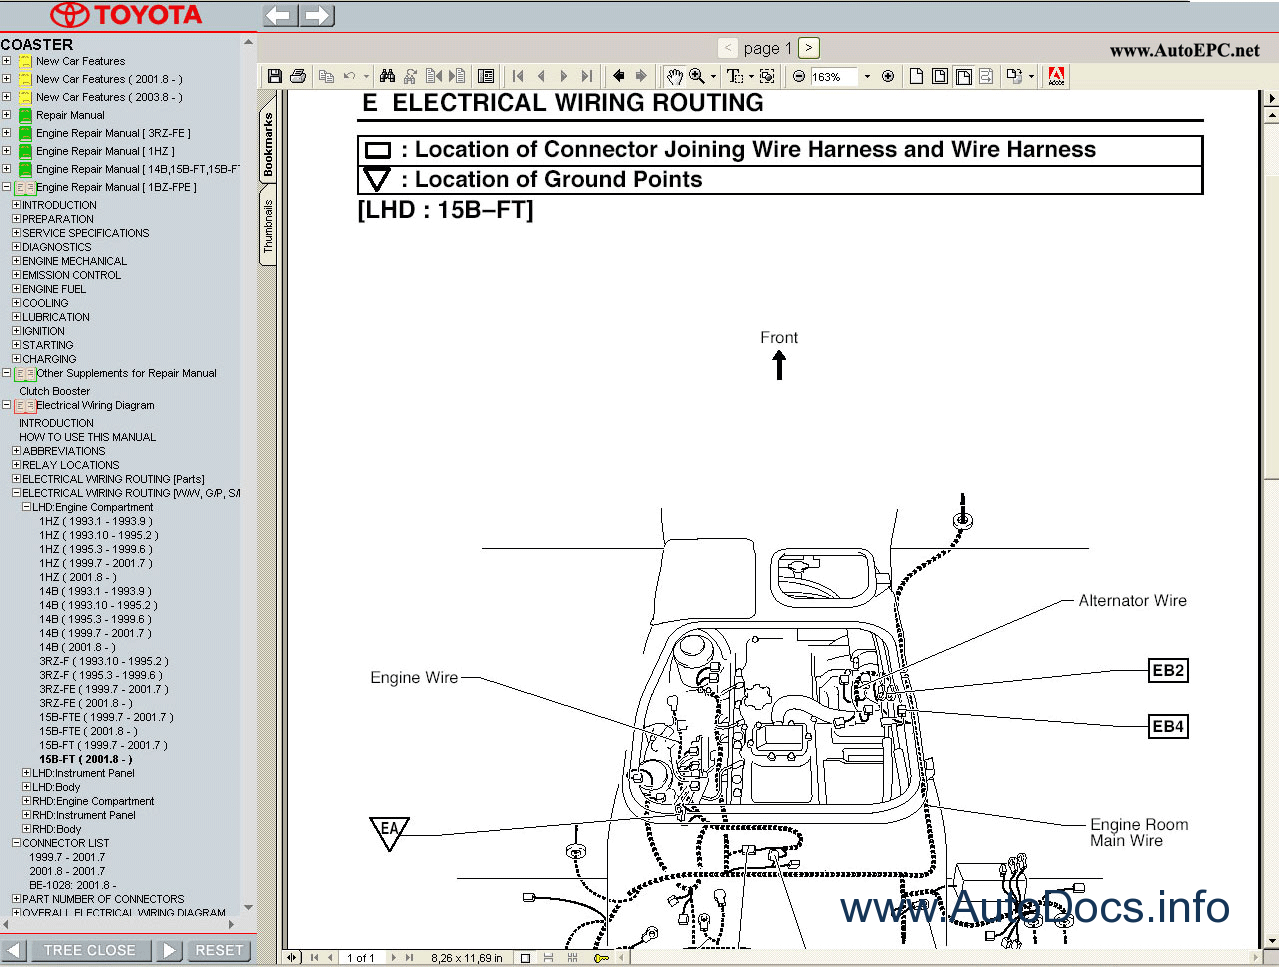 ... Wiring Diagram, Toyota, Free Engine Image For User Manual Download